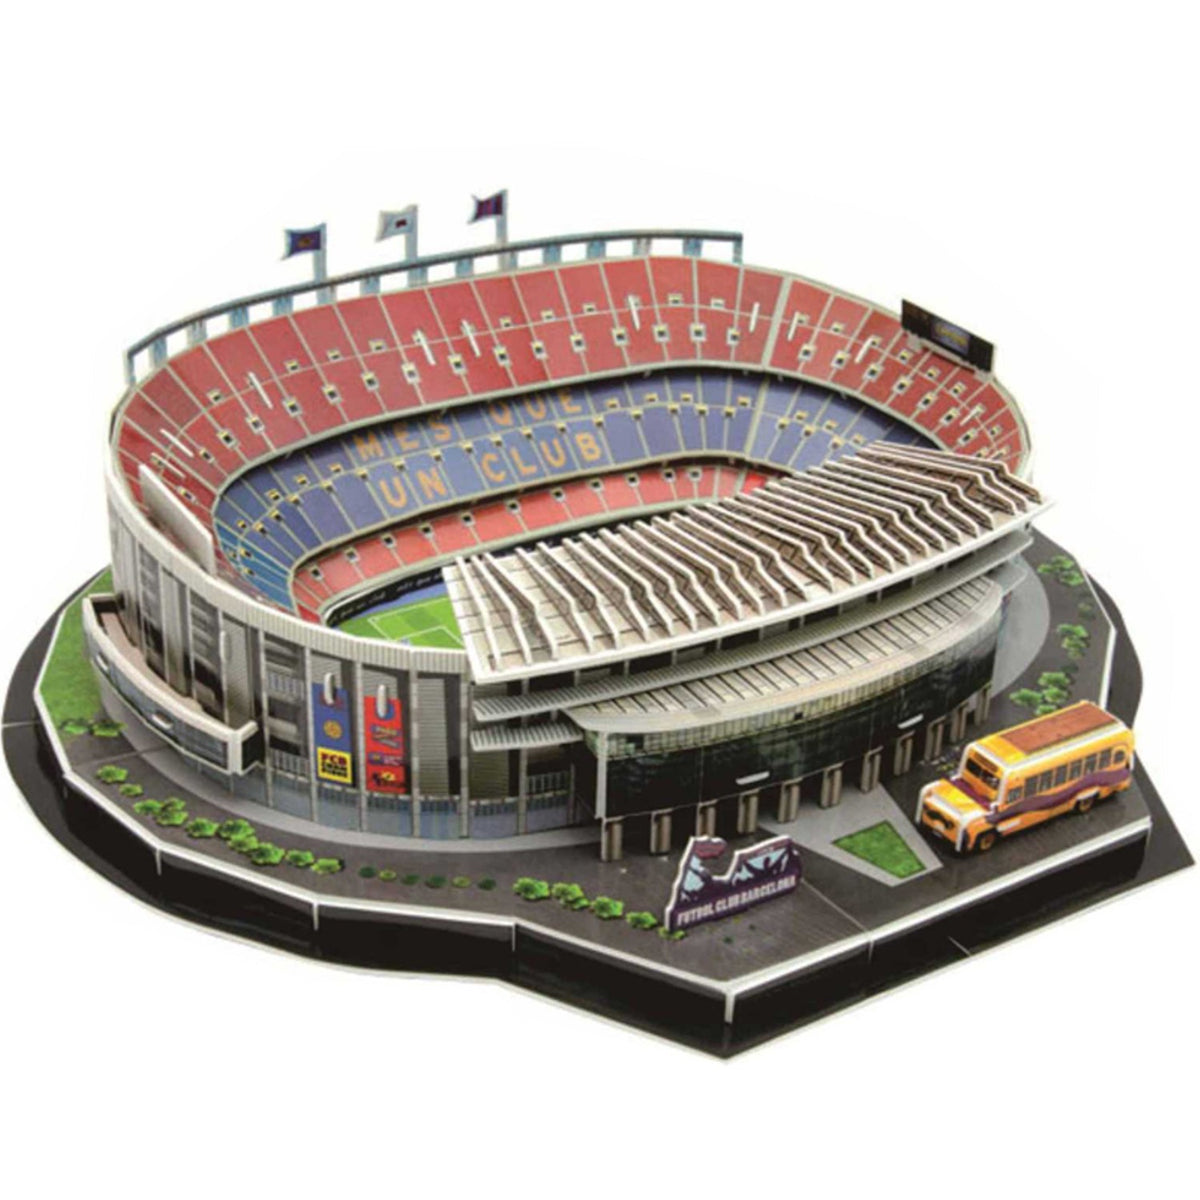 Jigsaw 3D Puzzle Camp Nou Football Game LEGO – BRICKPICK - Inspire and develop the builders of tomorrow